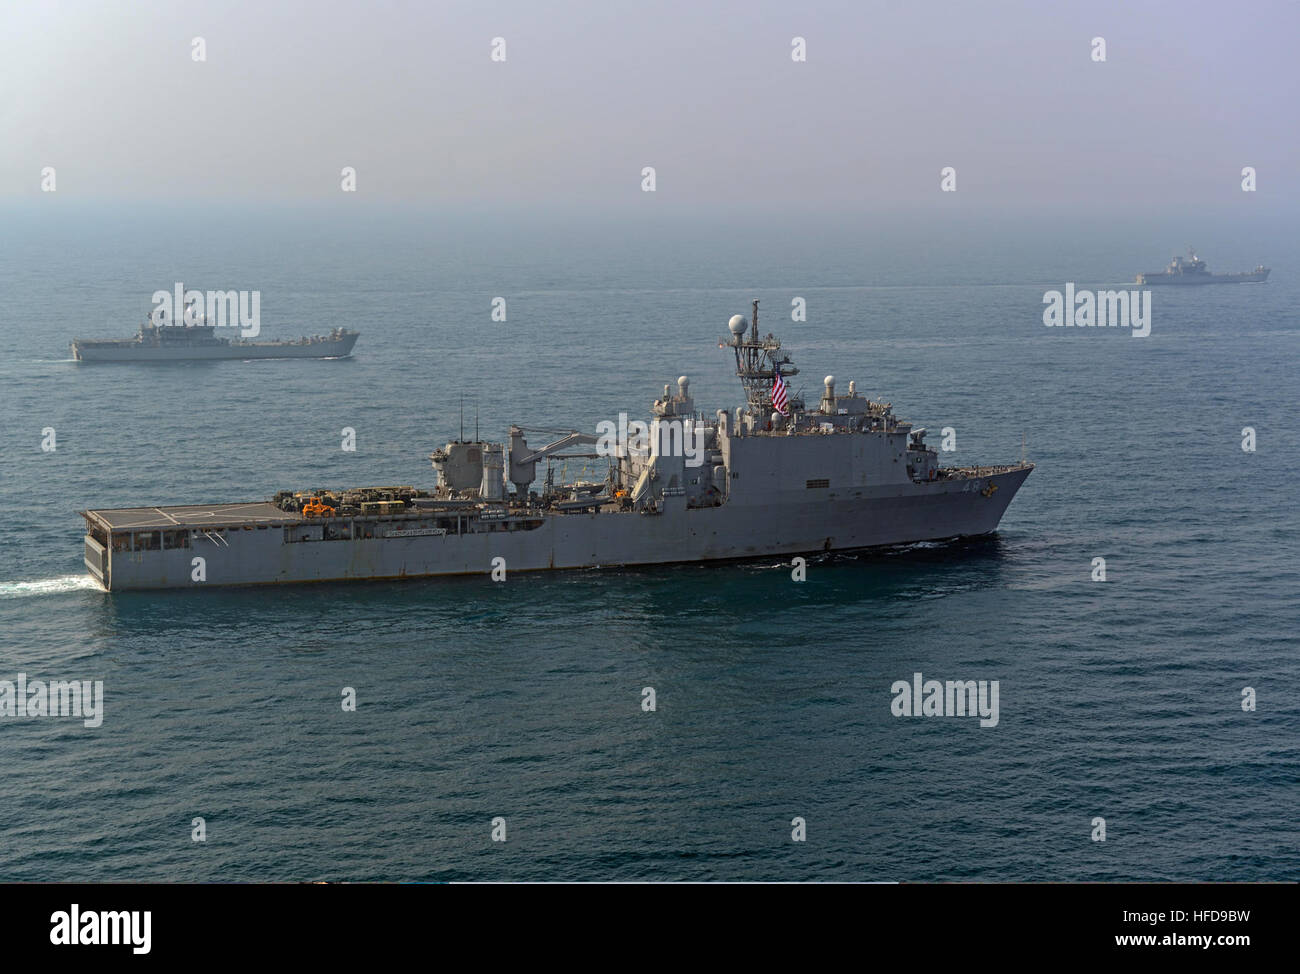 The amphibious transport dock ship USS Denver (LPD 9), front, and other ships assigned to the Bonhomme Richard Amphibious Ready Group are underway with Republic of Korea Navy ships during a photo exercise in the East China Sea March 27, 2014. The Denver was participating in exercise Ssang Yong 14, a combined U.S.-South Korean combat readiness and joint/combined interoperability exercise designed to advance South Korean command and control capabilities through amphibious operations. (U.S. Navy photo by Mass Communication Specialist 2nd Class Michael Achterling/Released) The amphibious transport Stock Photo